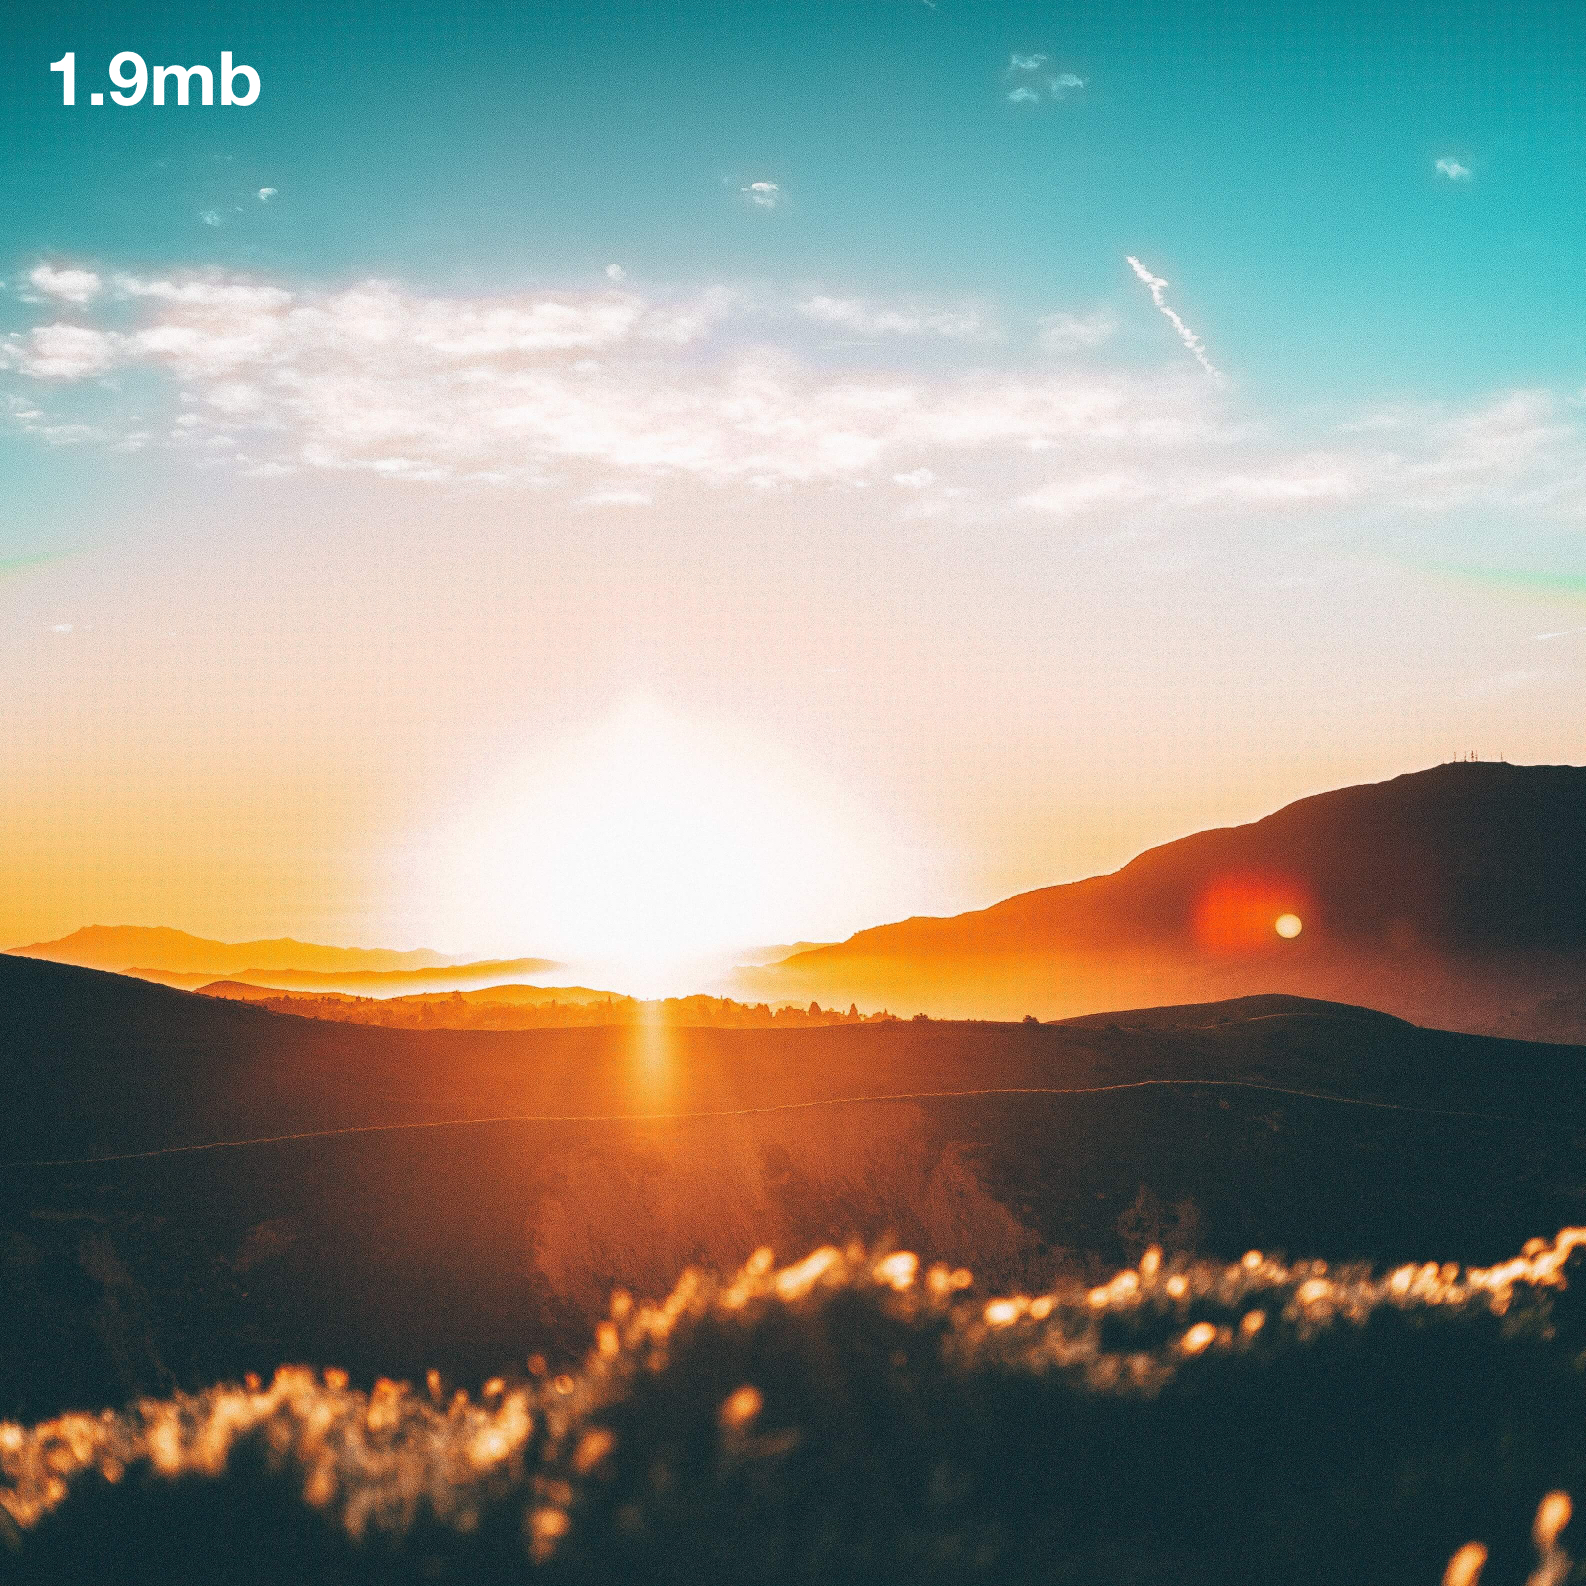 Sunset Image Example at 3.8mb